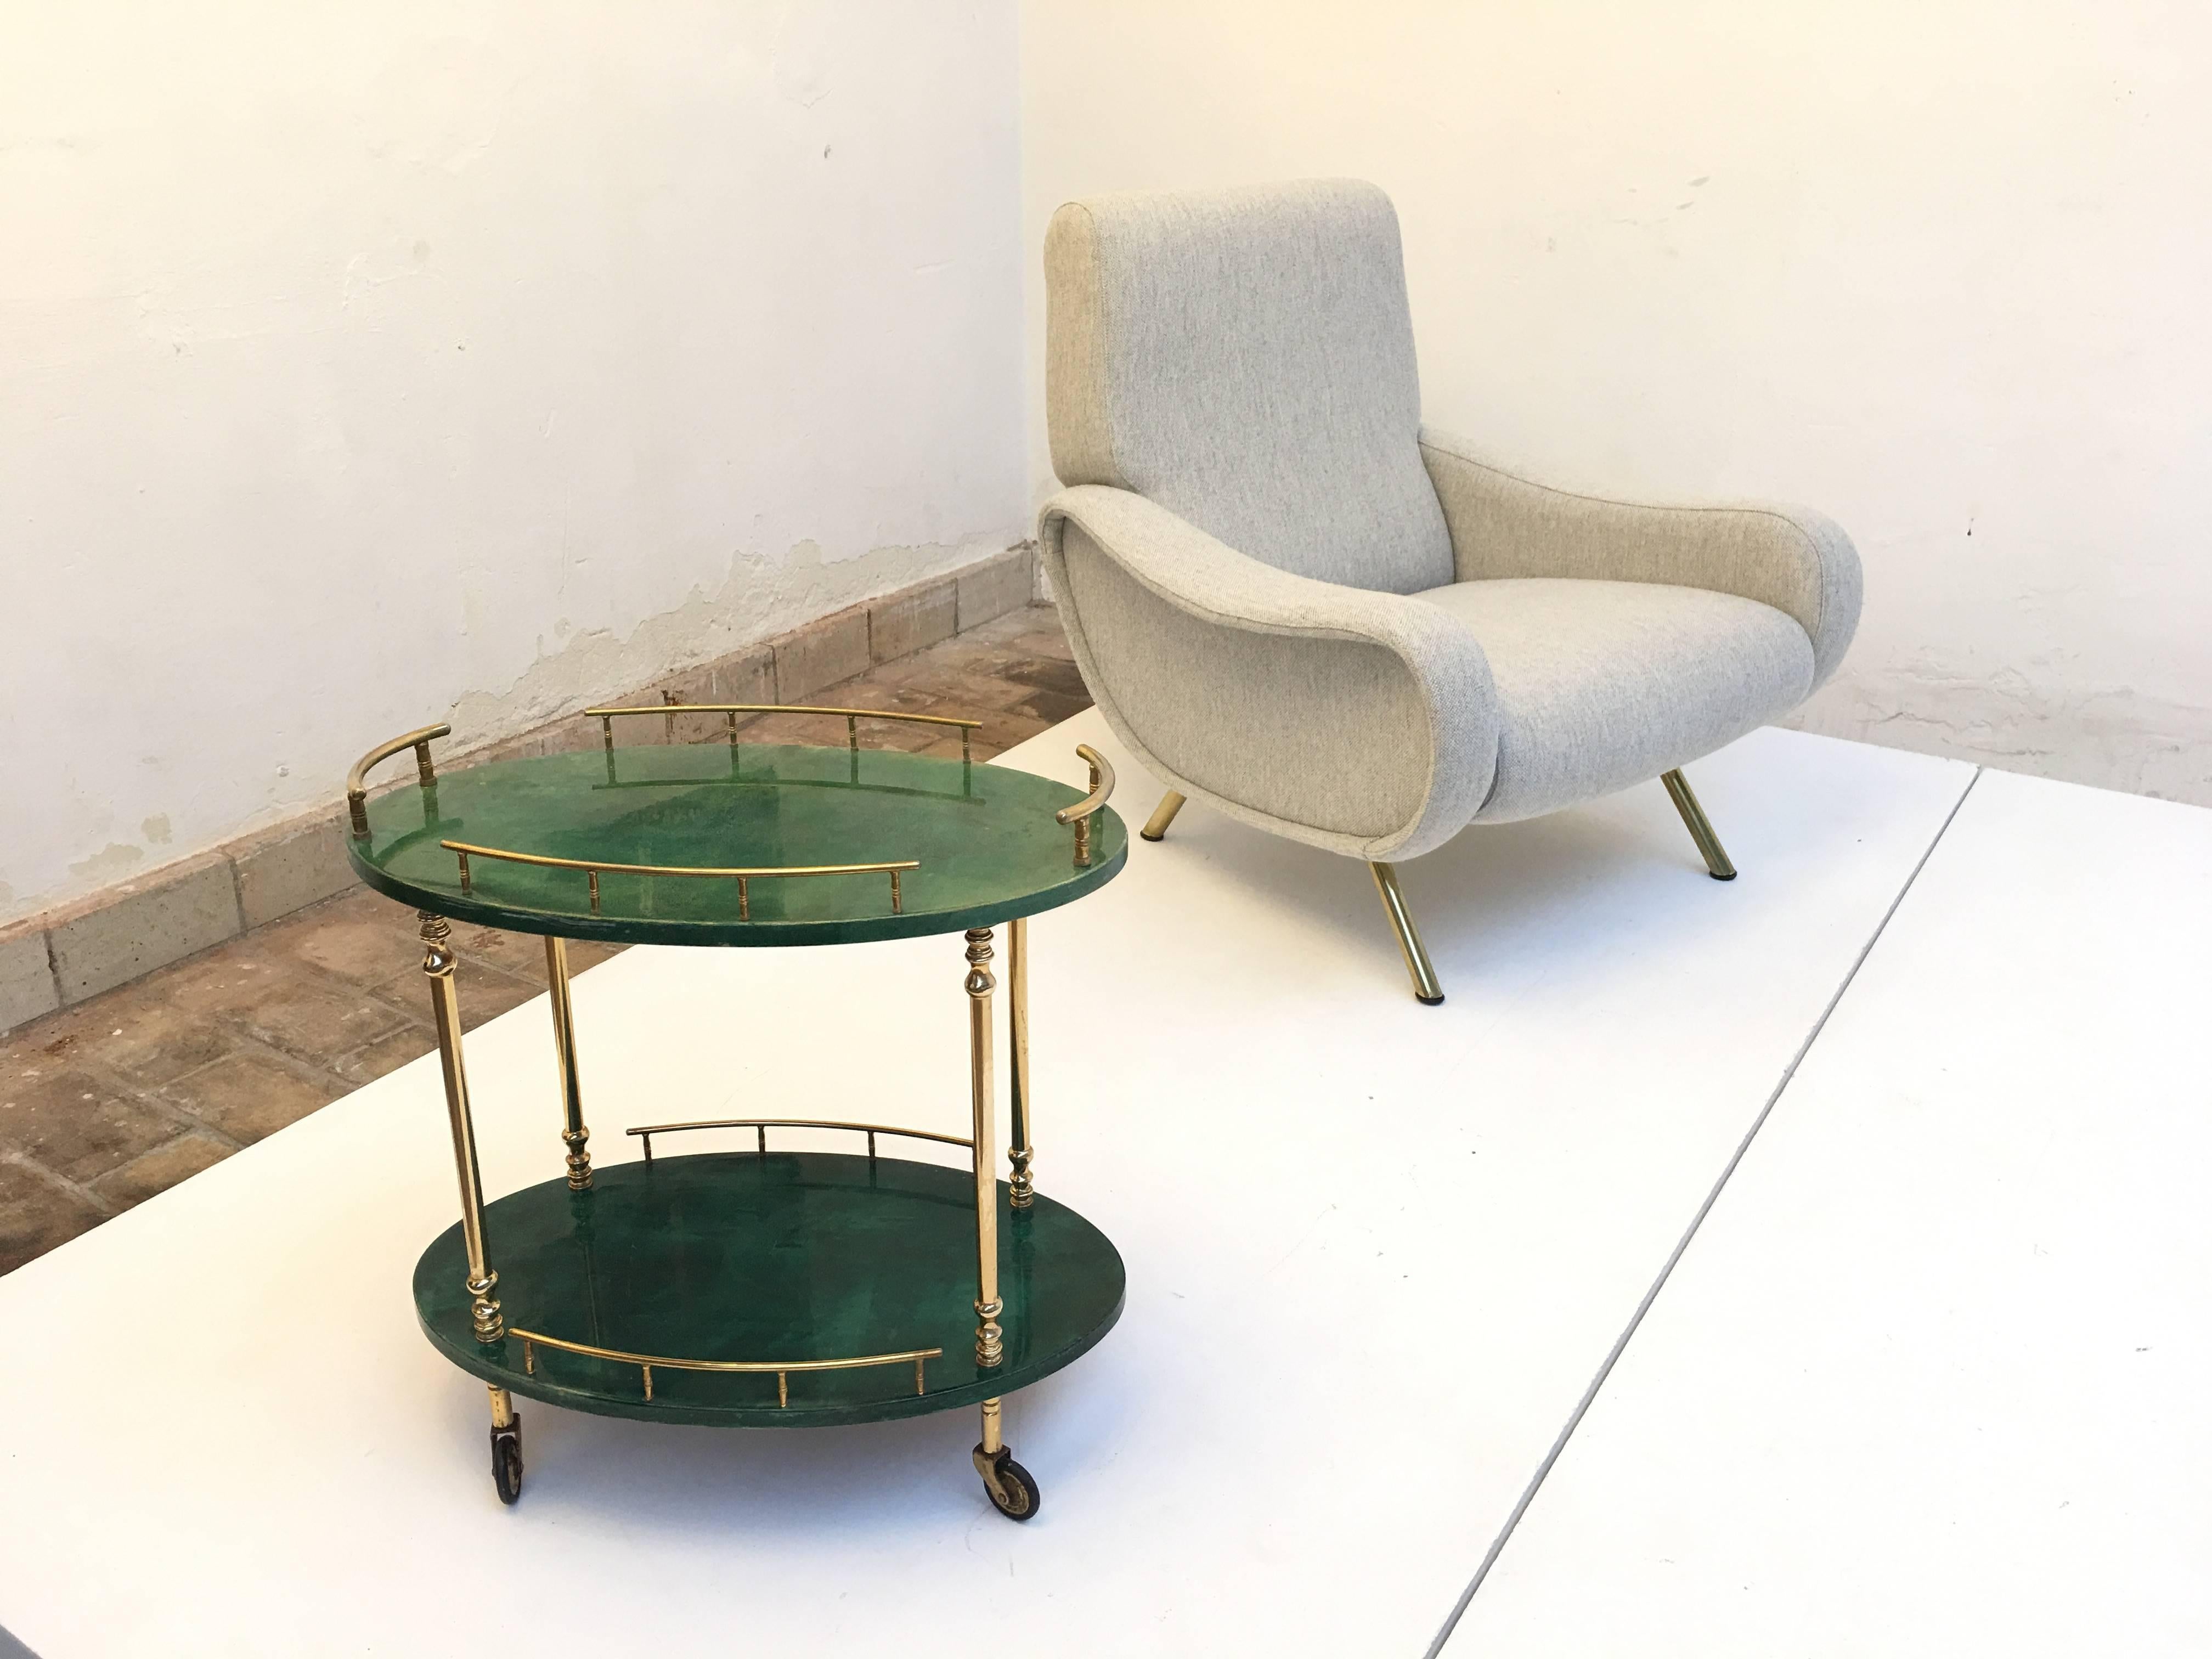 Top quality Italian chique by designer and entrepreneur Aldo Tura produced in Milan in the 1960s

This diminutive mobile drink cart or side table is made of brass and lacquered green dyed goatskin on wood

It is marked with the Aldo Tura label